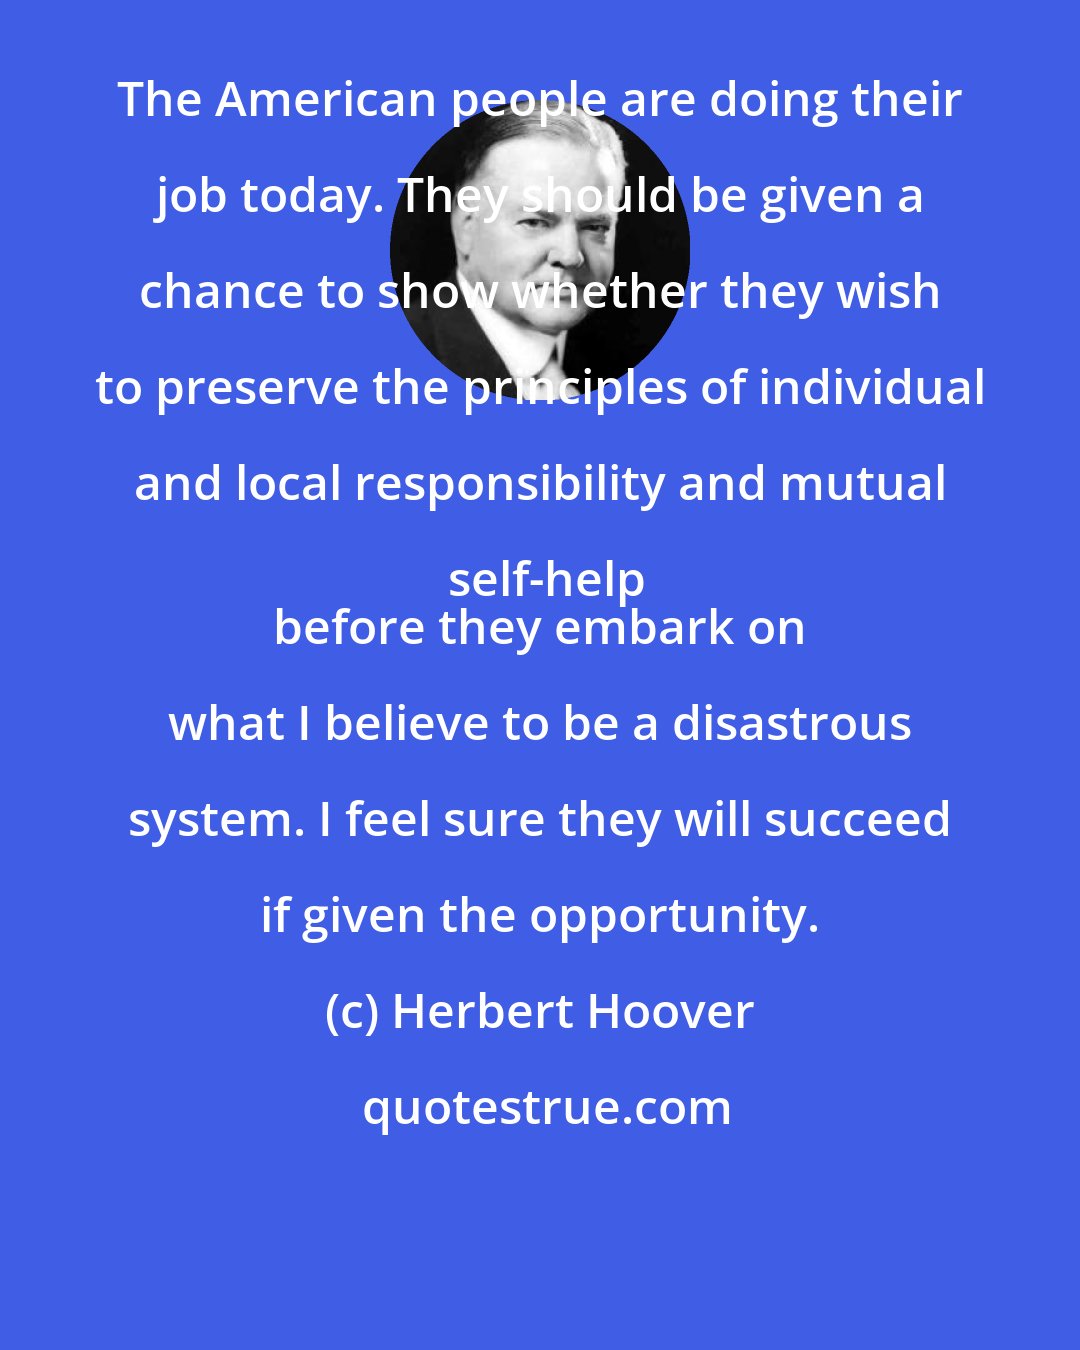 Herbert Hoover: The American people are doing their job today. They should be given a chance to show whether they wish to preserve the principles of individual and local responsibility and mutual self-help
 before they embark on what I believe to be a disastrous system. I feel sure they will succeed if given the opportunity.